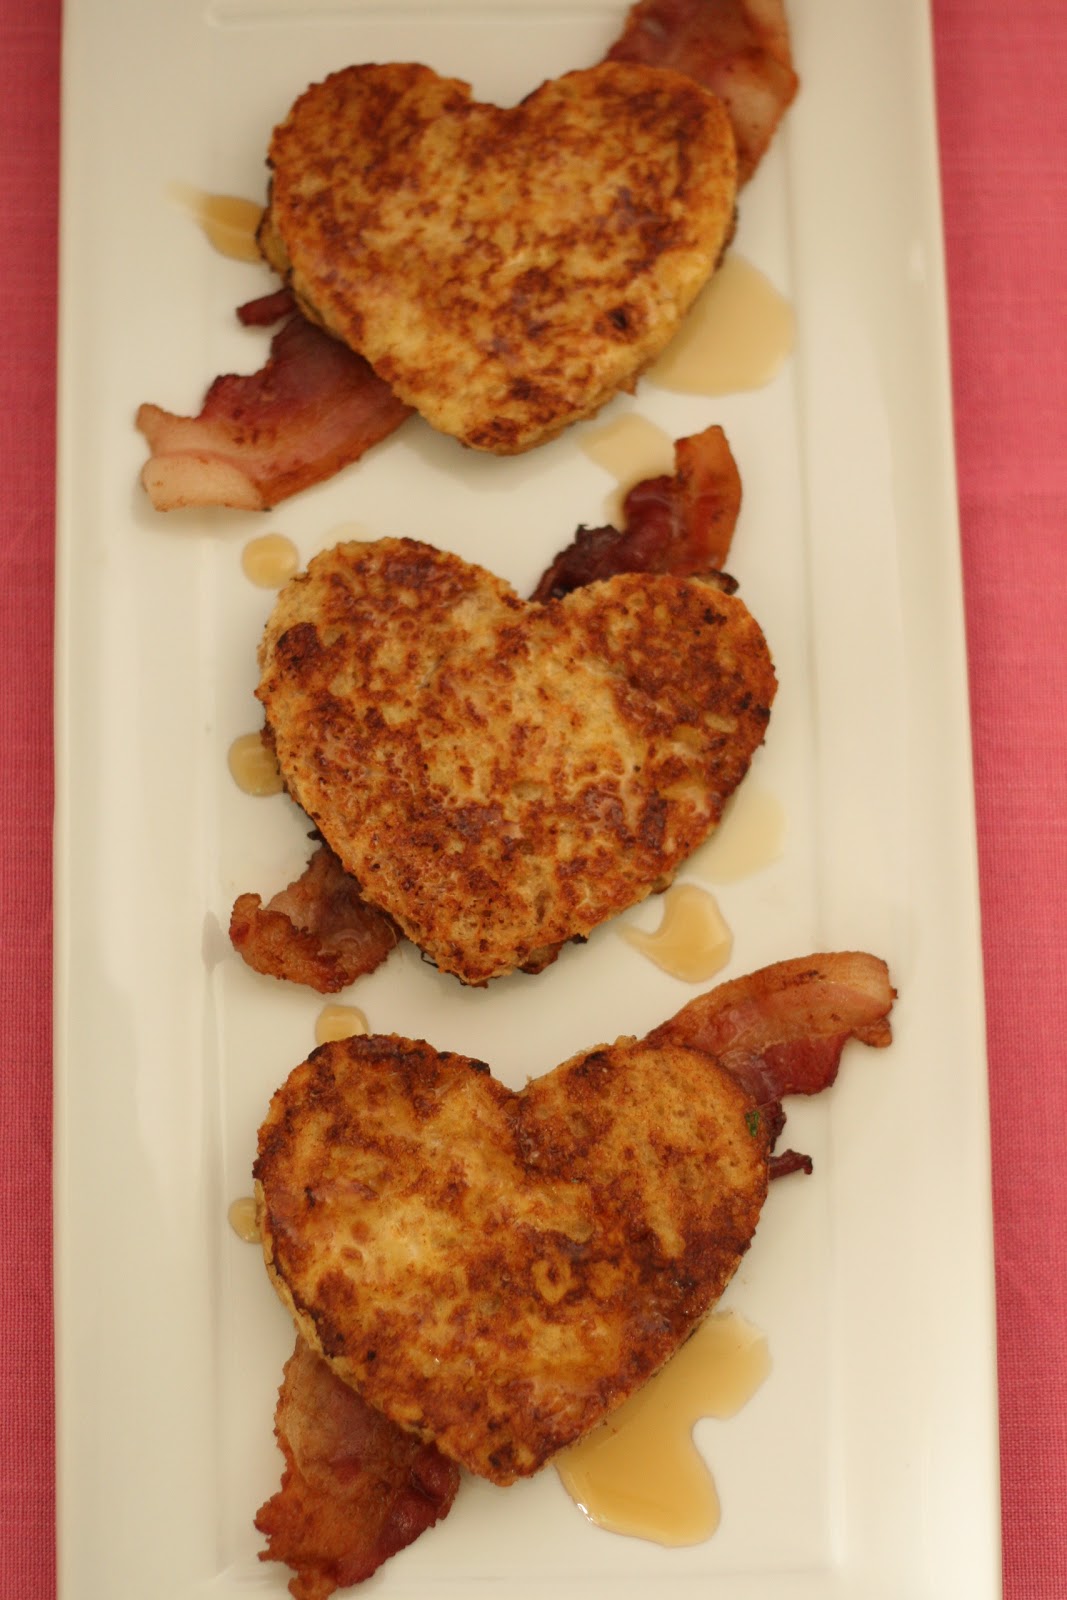 Gourmet Goodies: ROMANTIC FOOD IDEAS FOR VALENTINE'S DAY